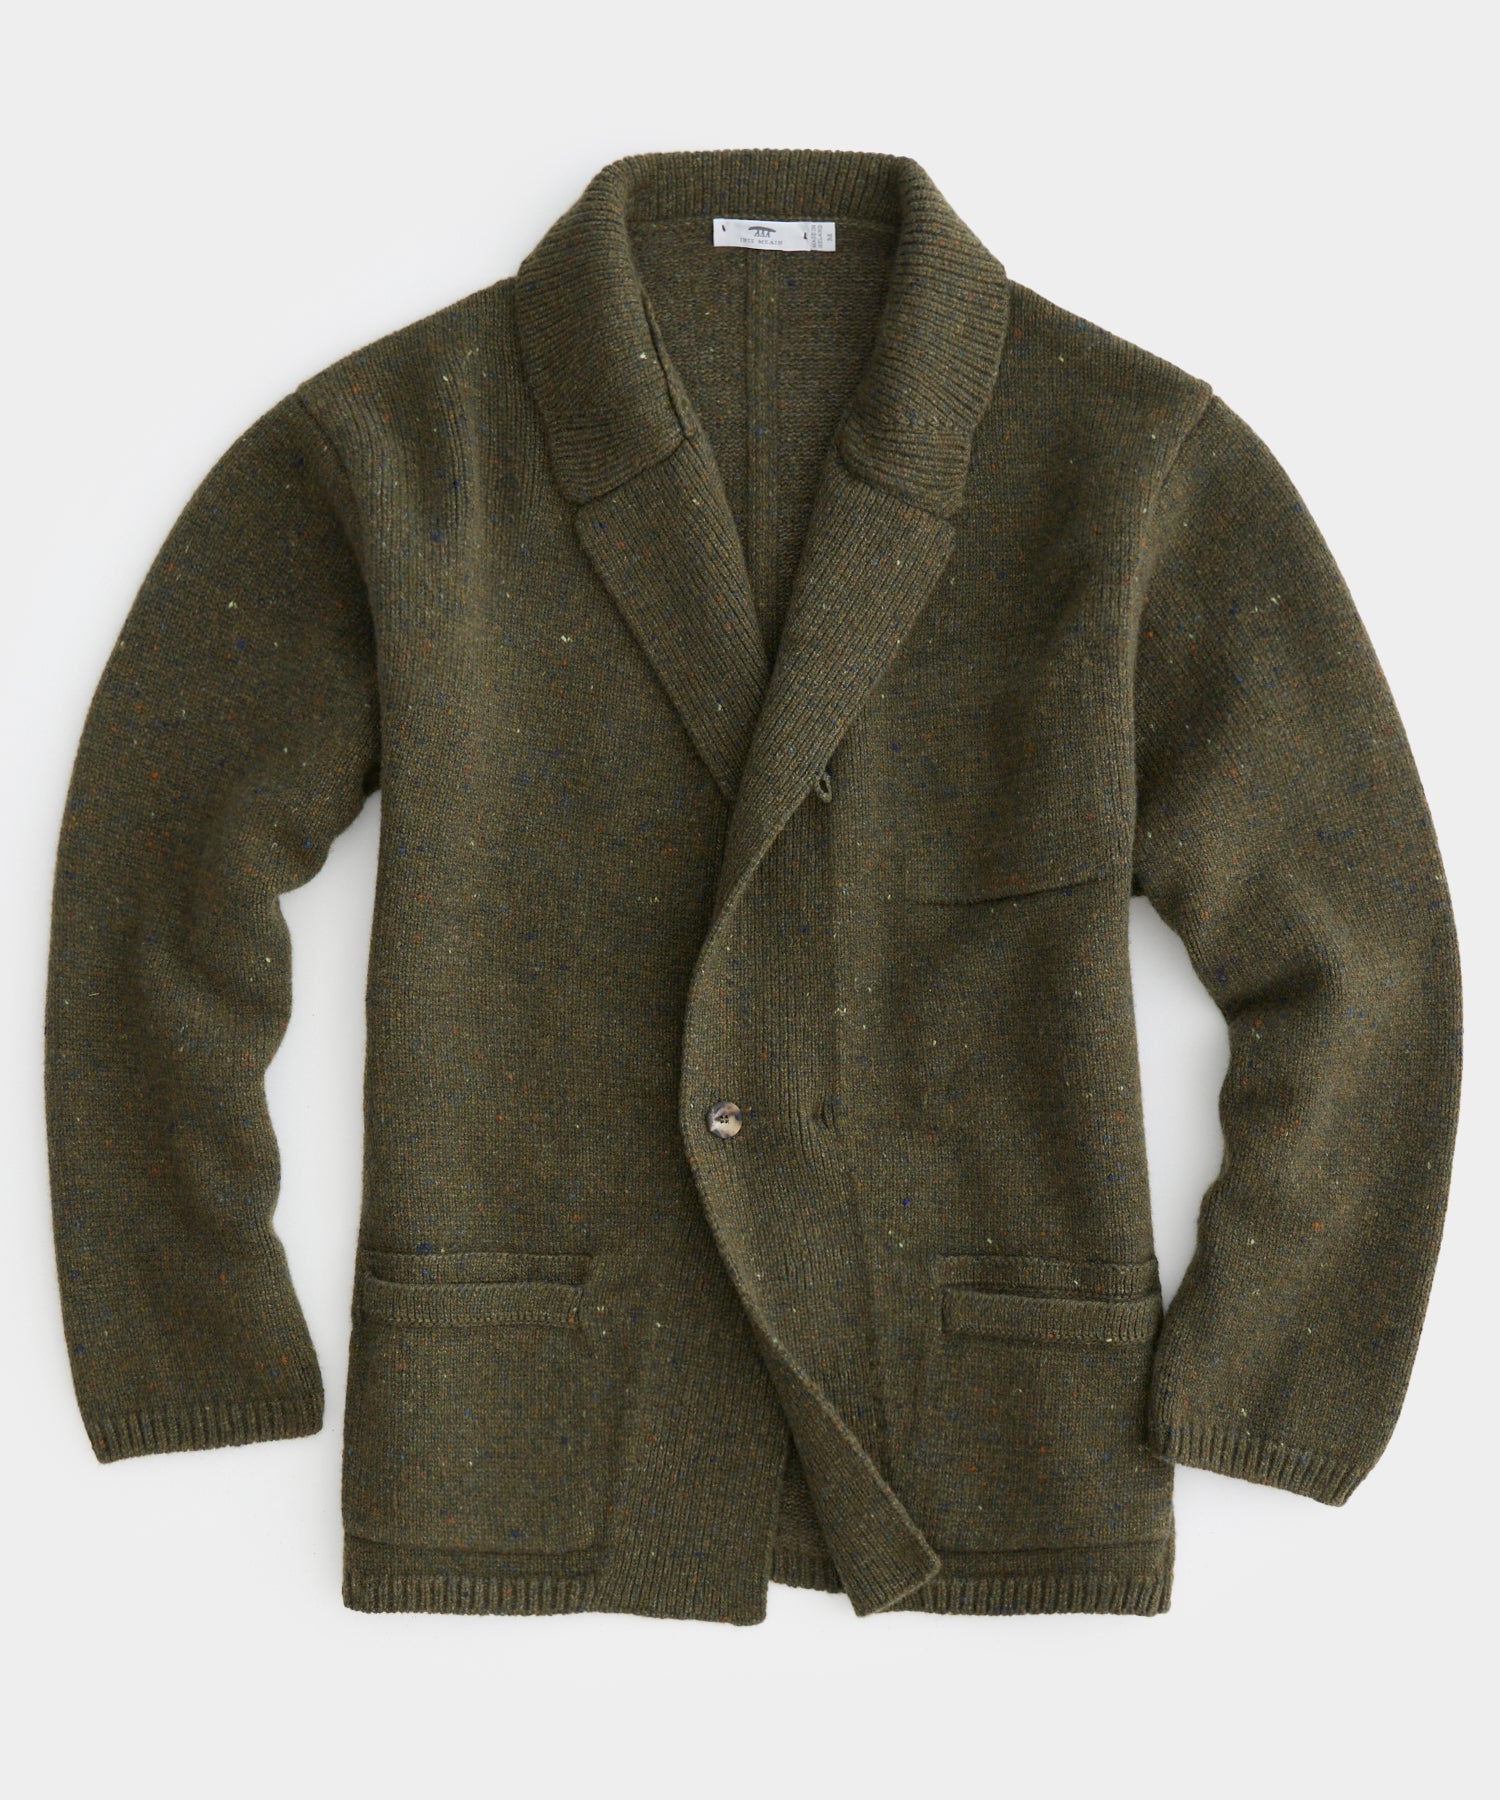 Inis Meáin Relax Jacket in Olive